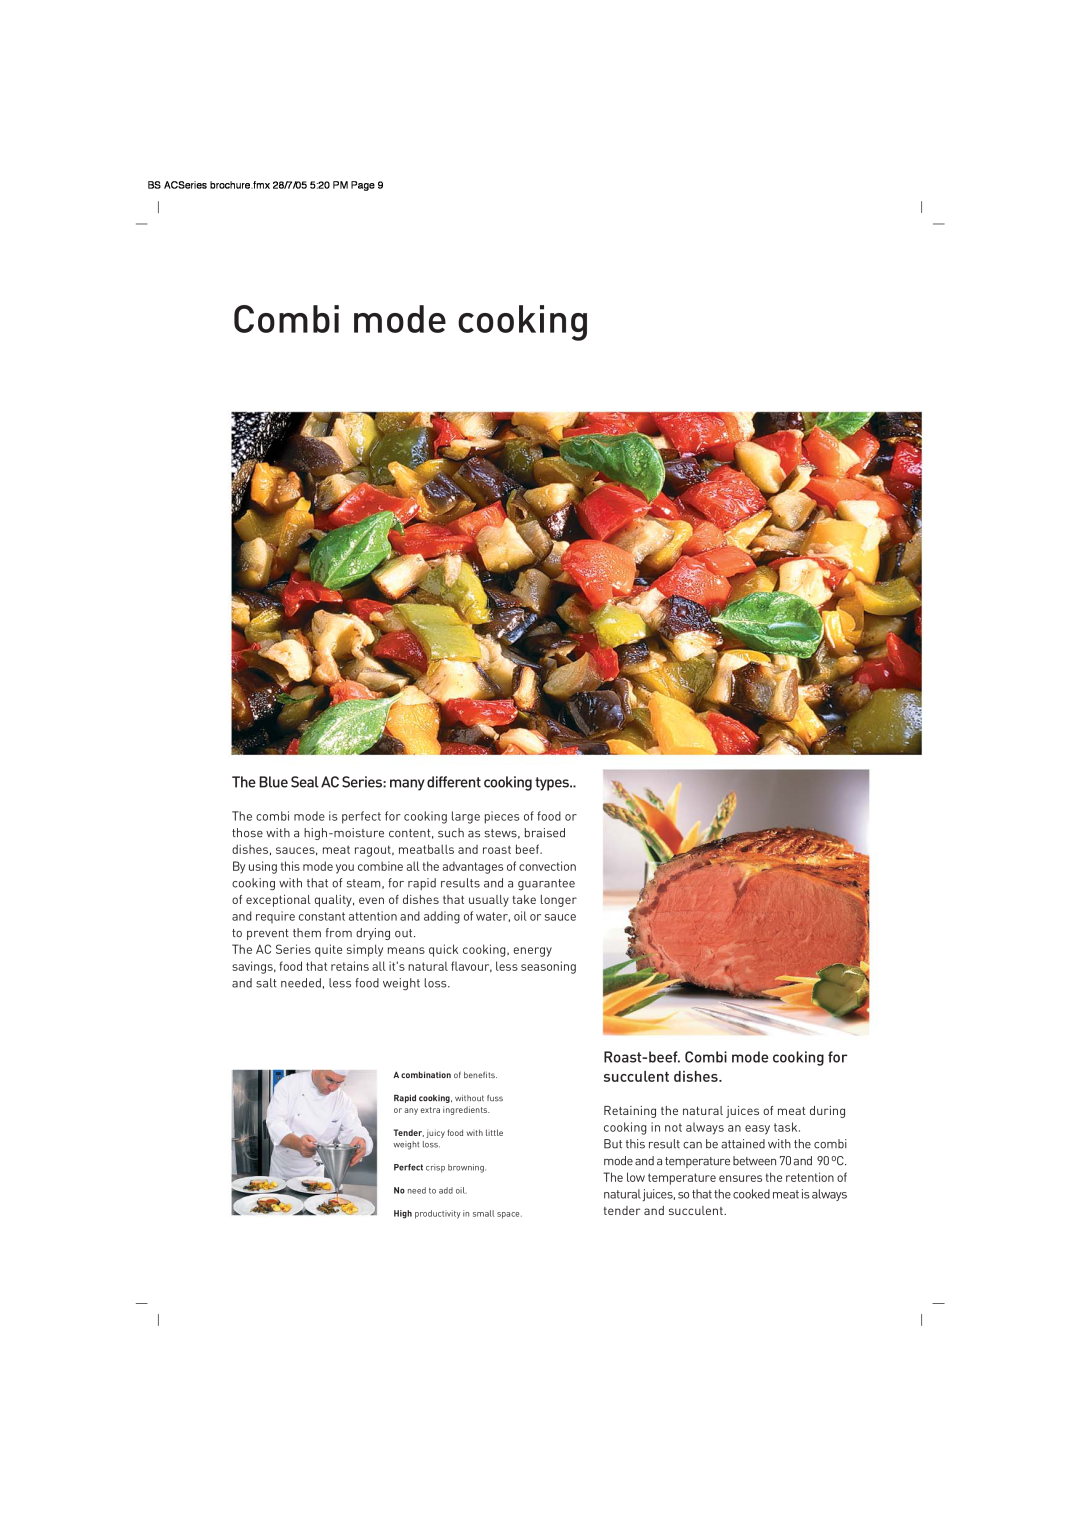 Moffat AC Series brochure Combi mode cooking, TheBlueSealACSeriesmanydifferentcookingtypes 